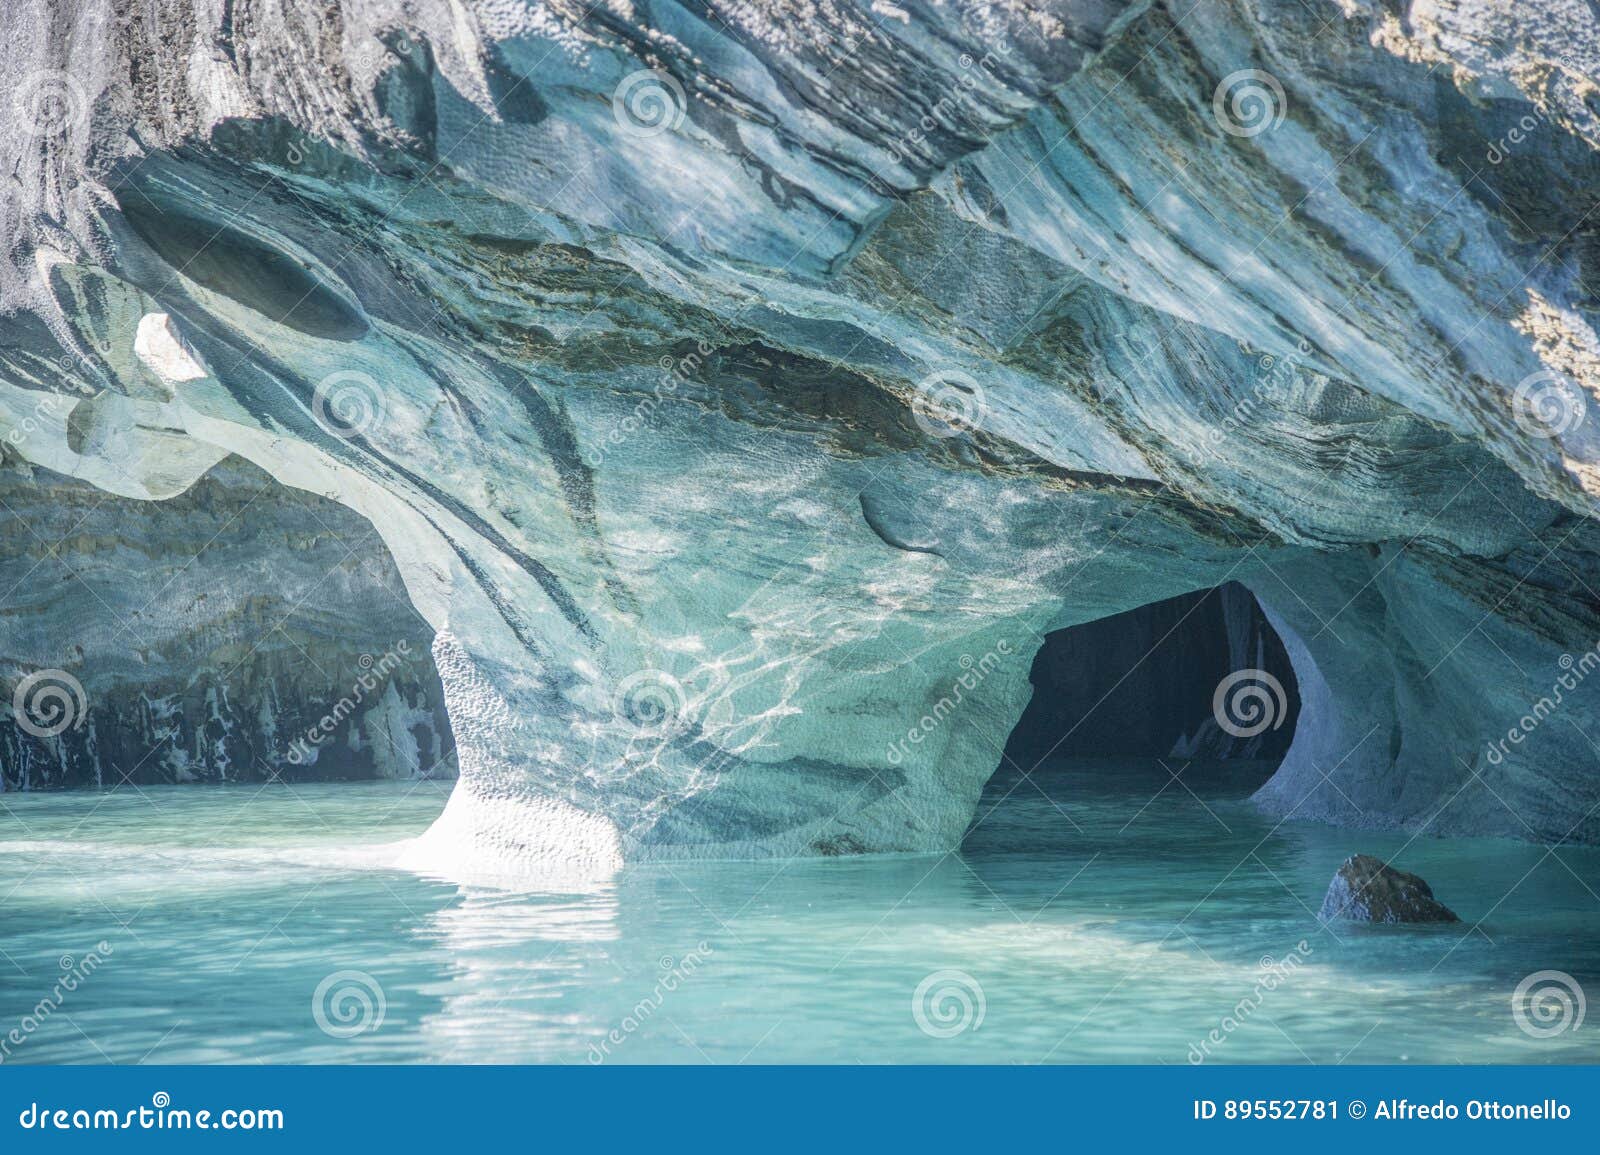 marble cathedral, general carrera lake, chile.